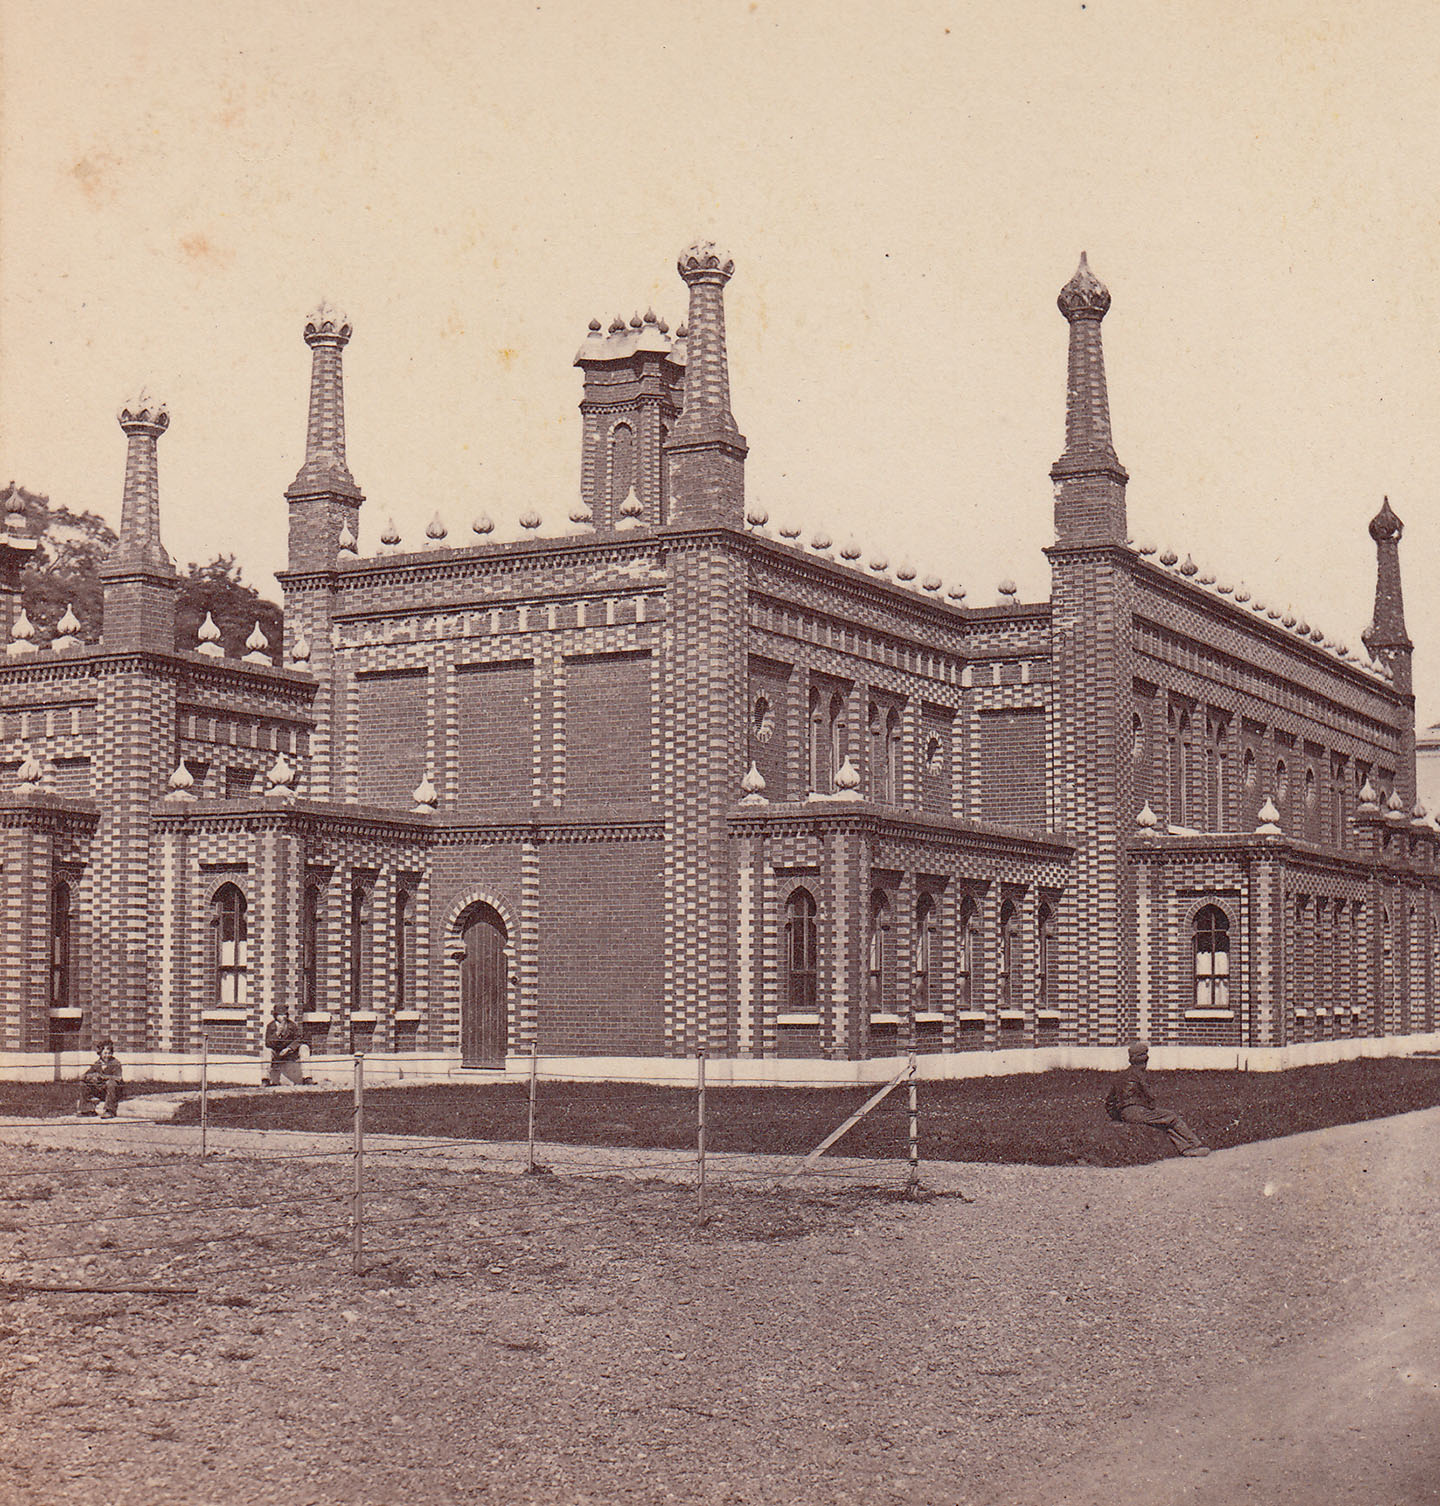 From a stereoview card showing the brickwork of the Bray baths